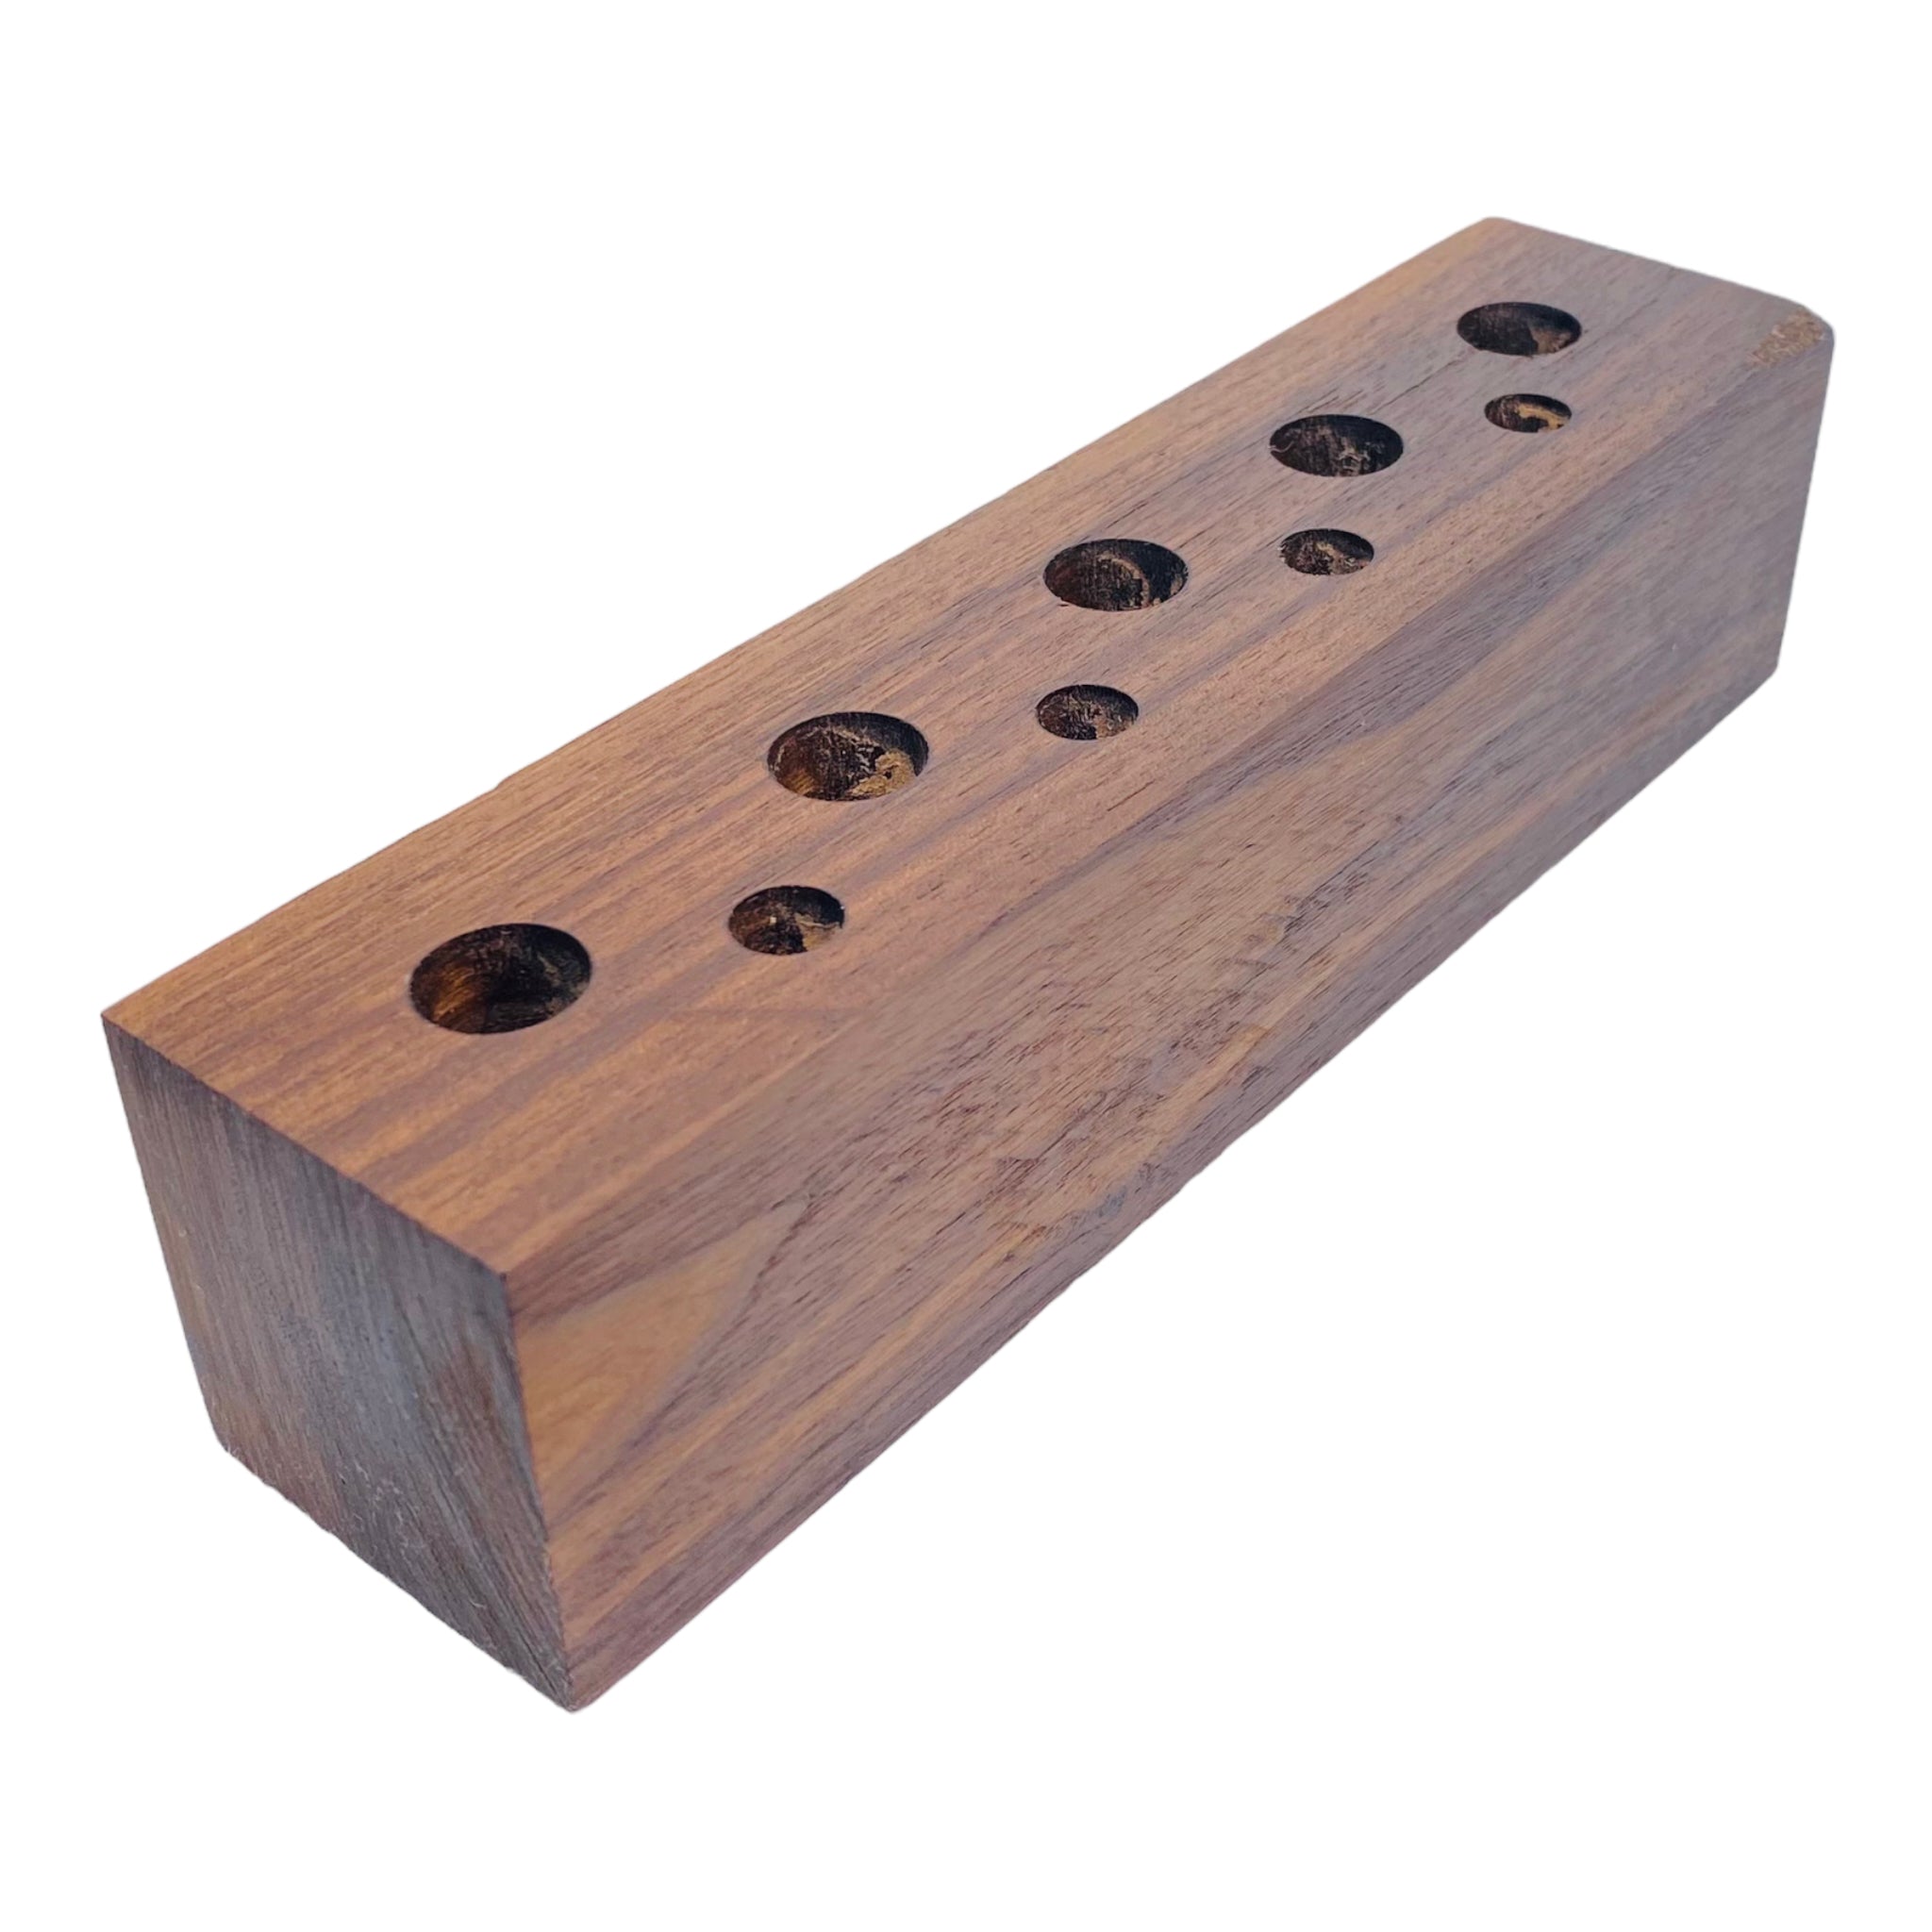 9 Hole Wood Display Stand Holder For 14mm And 10mm Bong Bowl Pieces Or Quartz Bangers